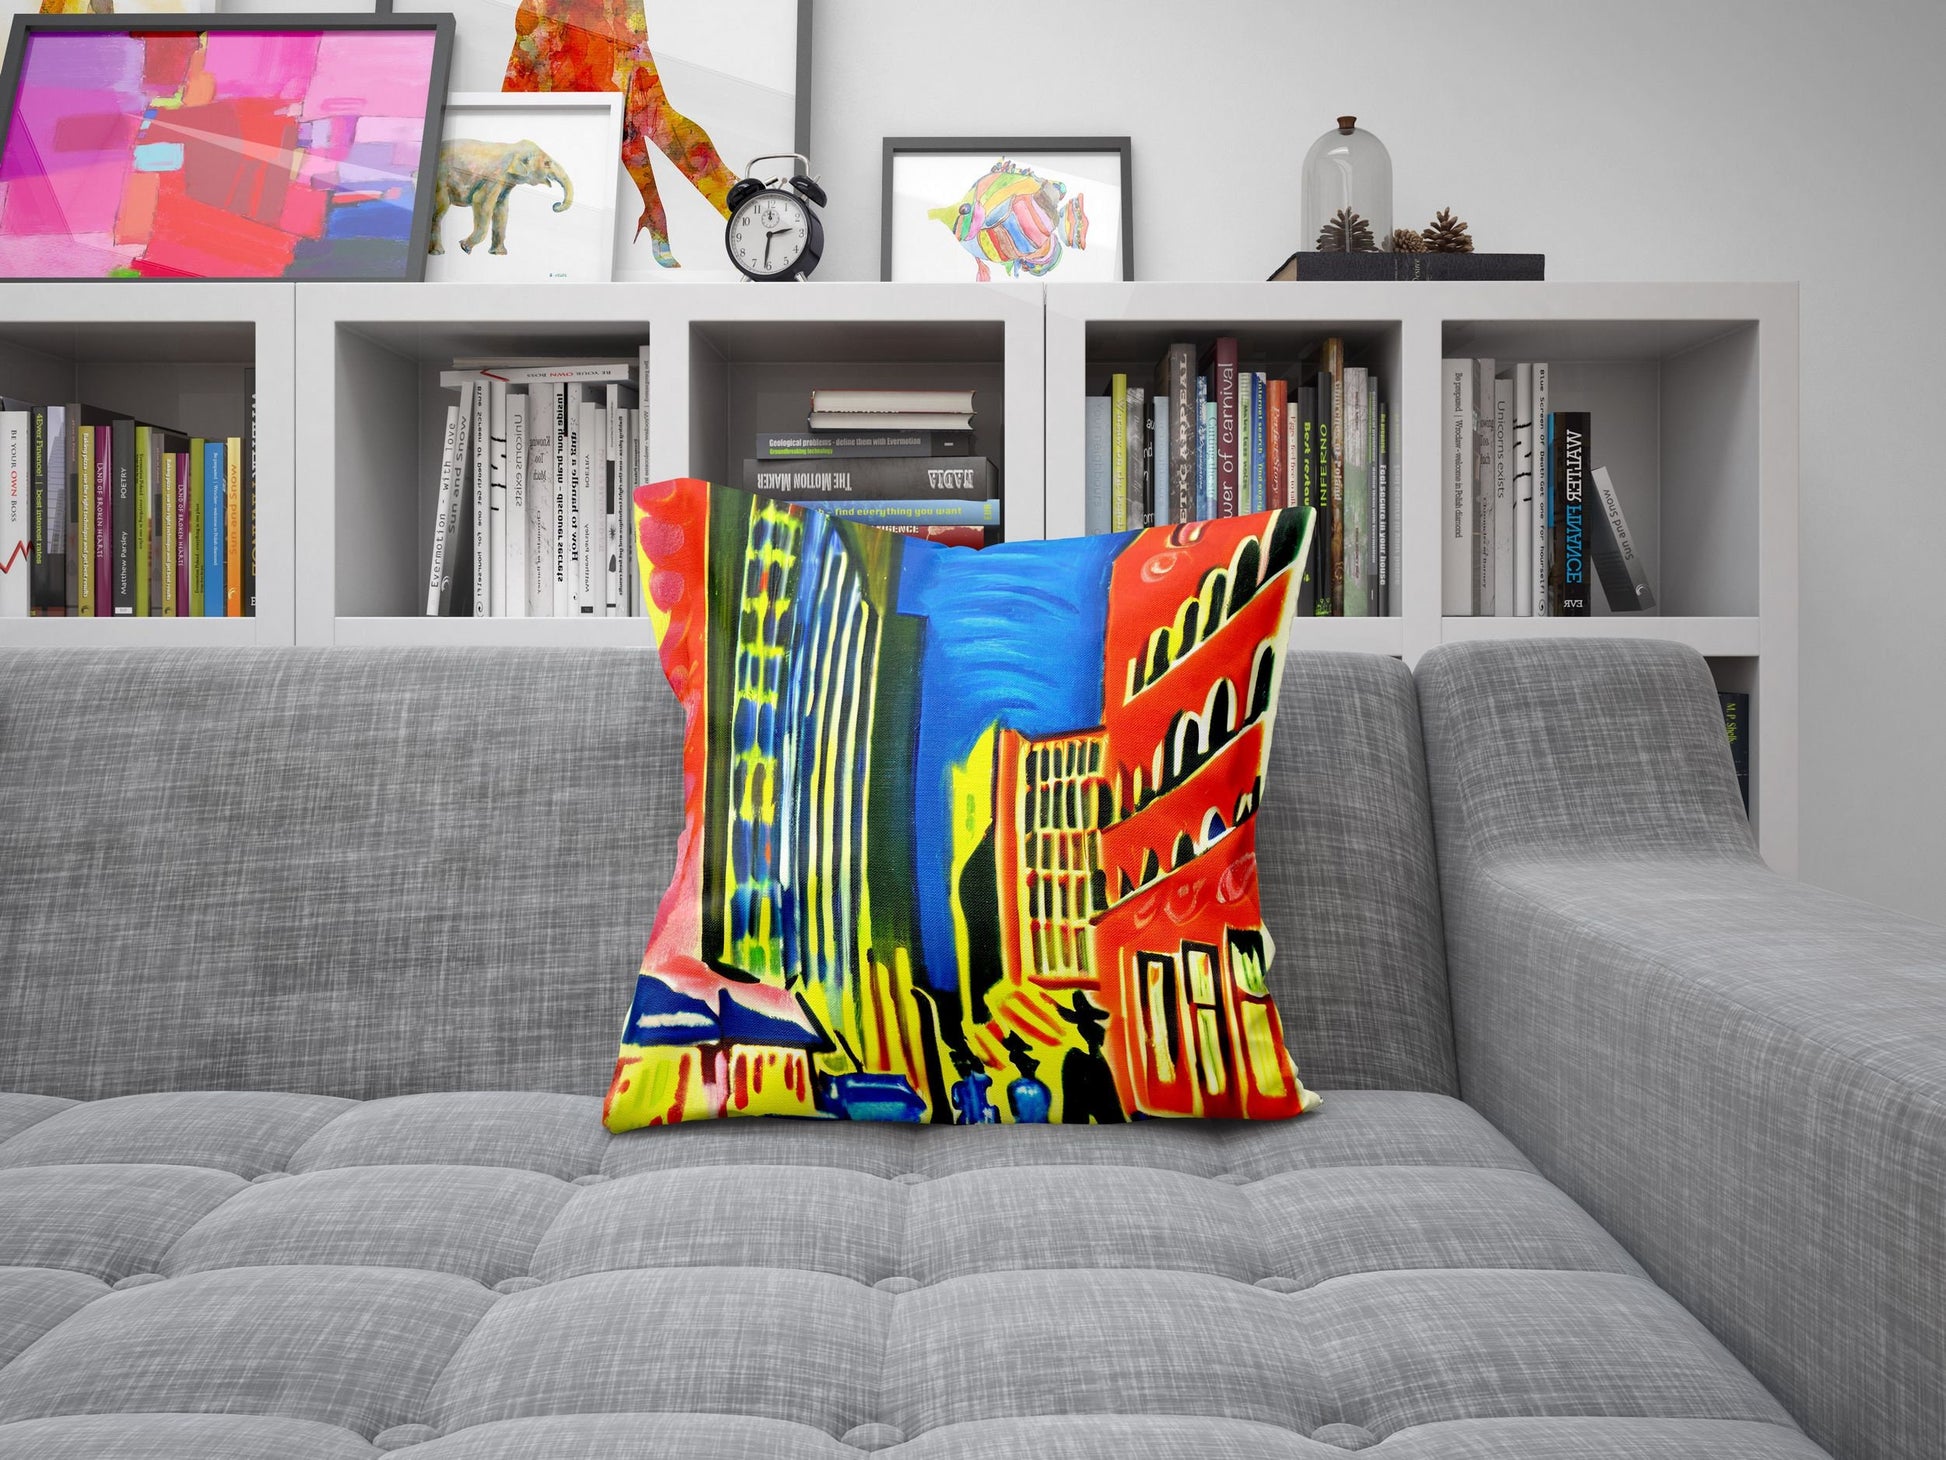 Night View Of Chicago, Toss Pillow, Abstract Pillow, Comfortable, Colorful Pillow Case, Contemporary Pillow, Square Pillow, Home Decor